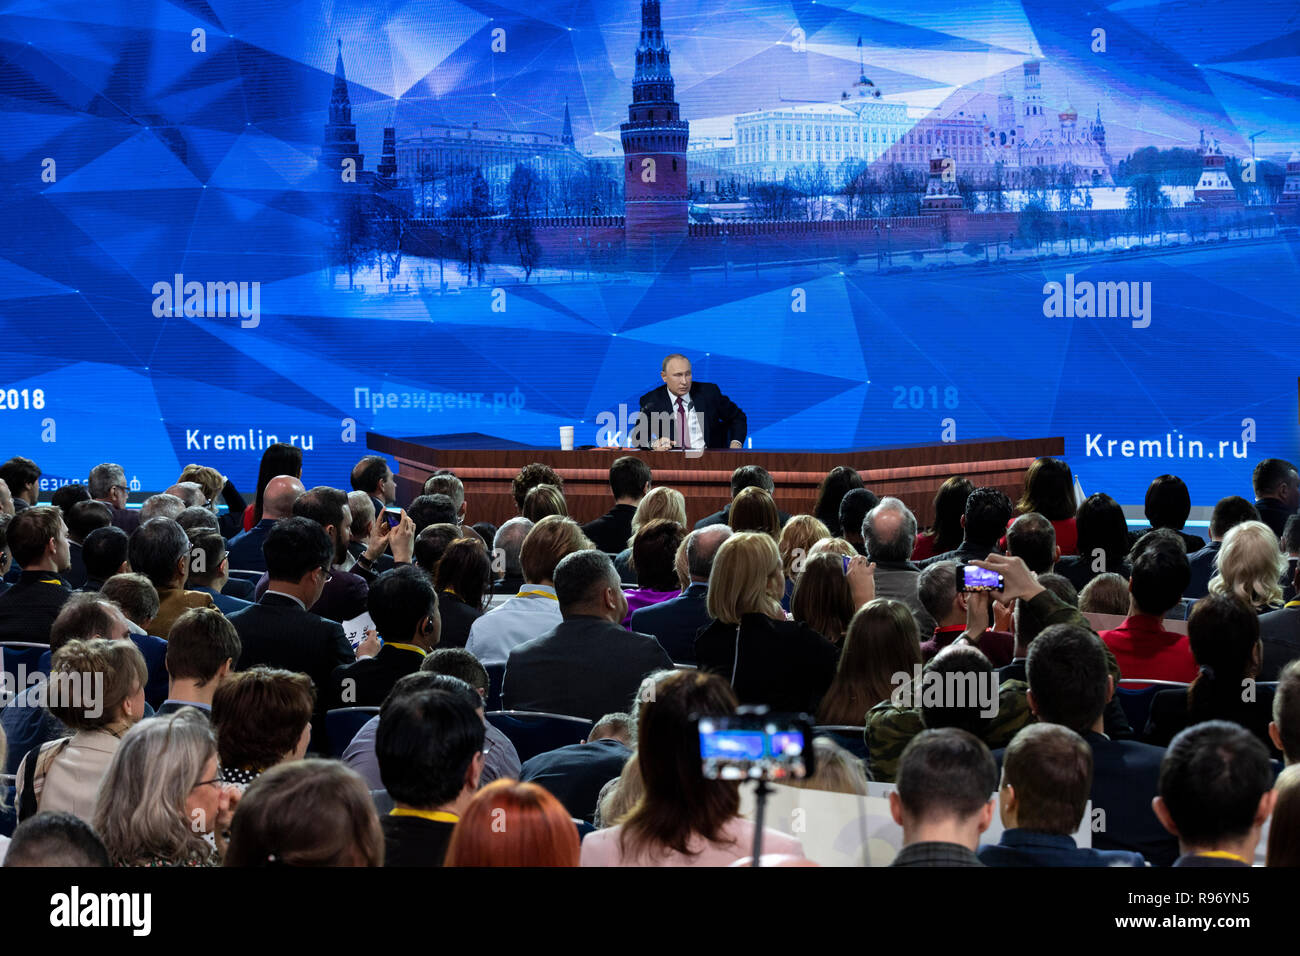 Moscow, Russia. 20th December, 2018: Russia's President Vladimir Putin gives an annual end-of-year press conference at Moscow's World Trade Centre Credit: Nikolay Vinokurov/Alamy Live News Stock Photo